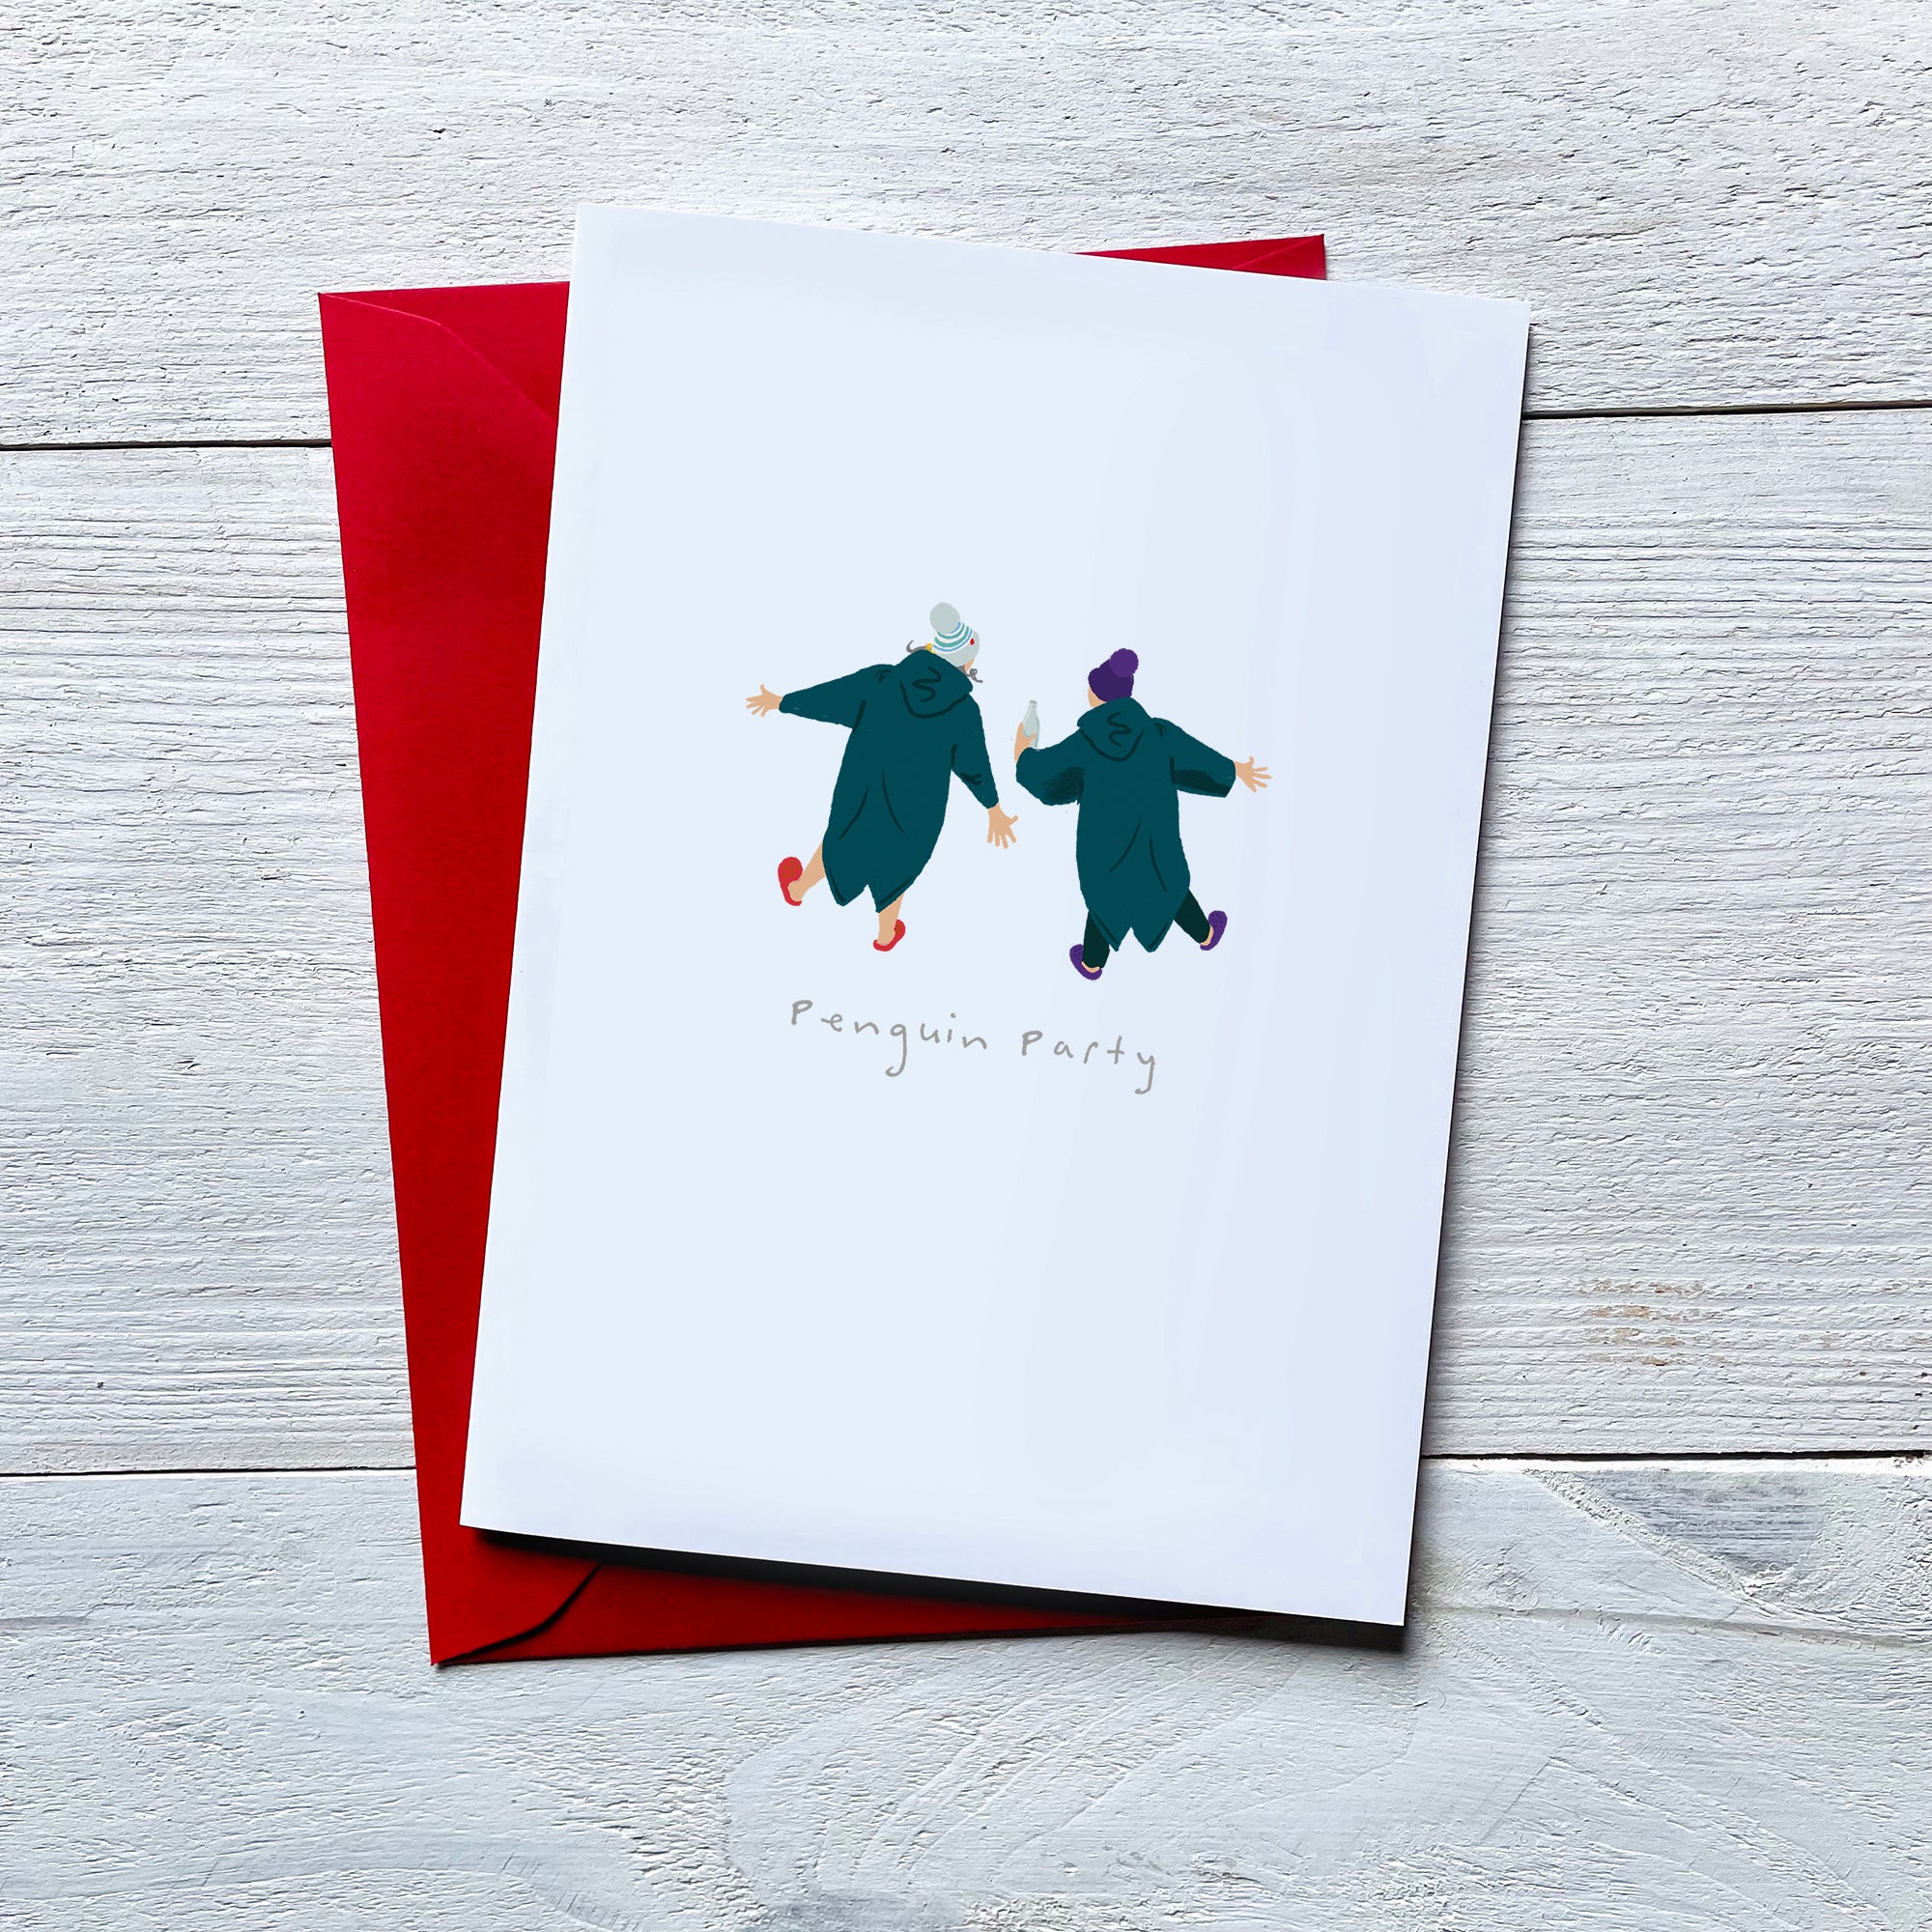 Birthday card for open water wild swimmers. 'Penguin Party'